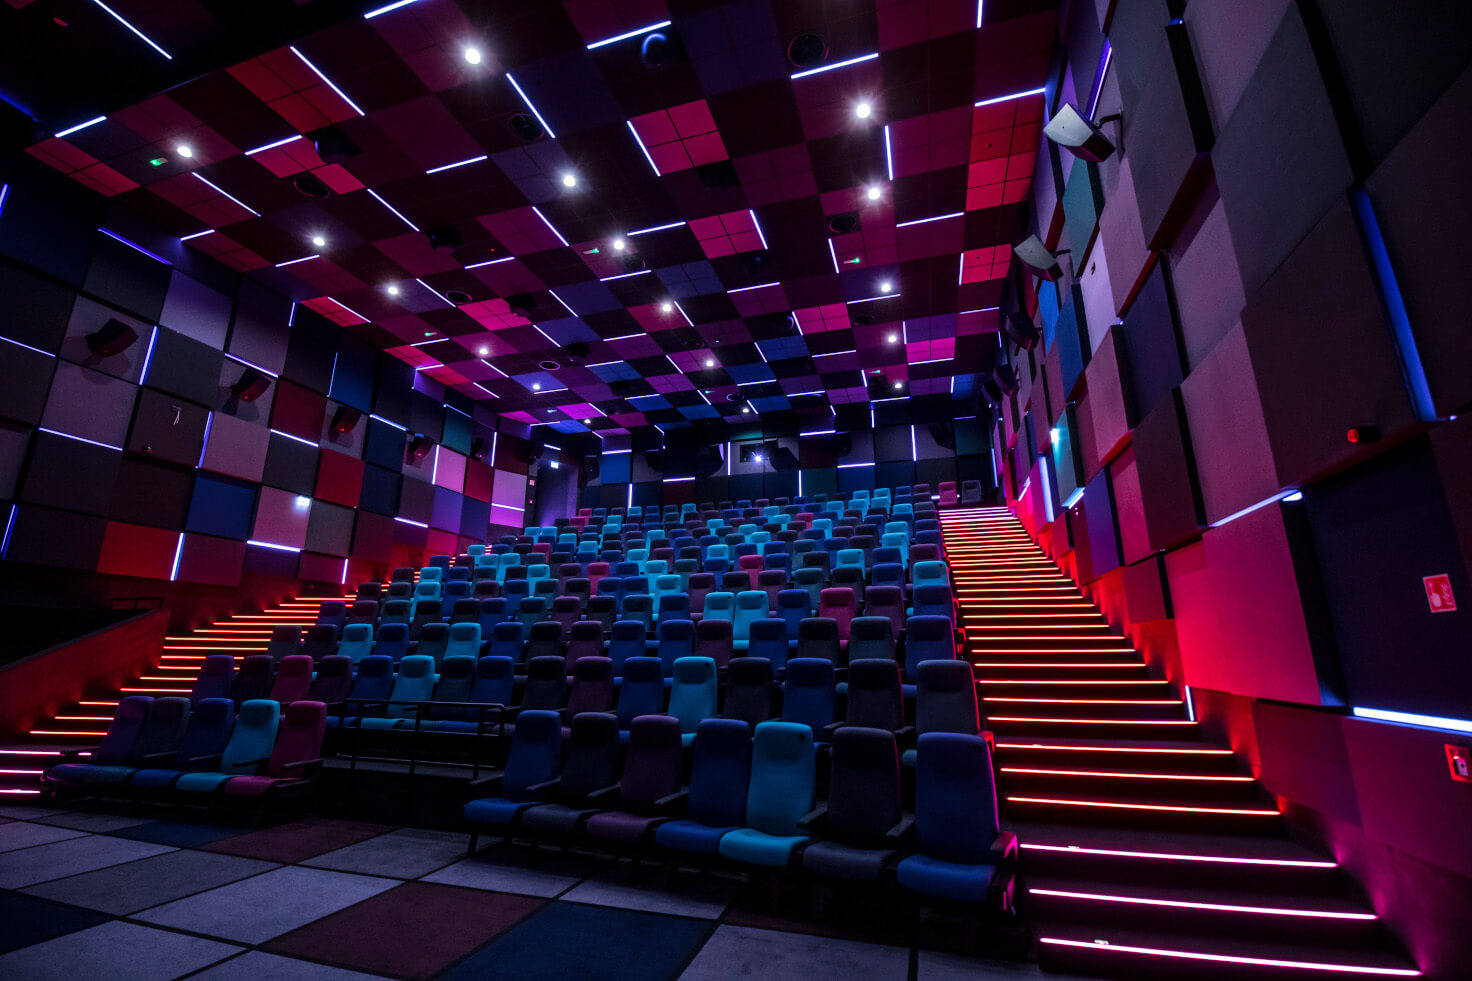 ETELE Cinema in Budapest Wows with a Child-Friendly Movie Theater & Reclining Seats